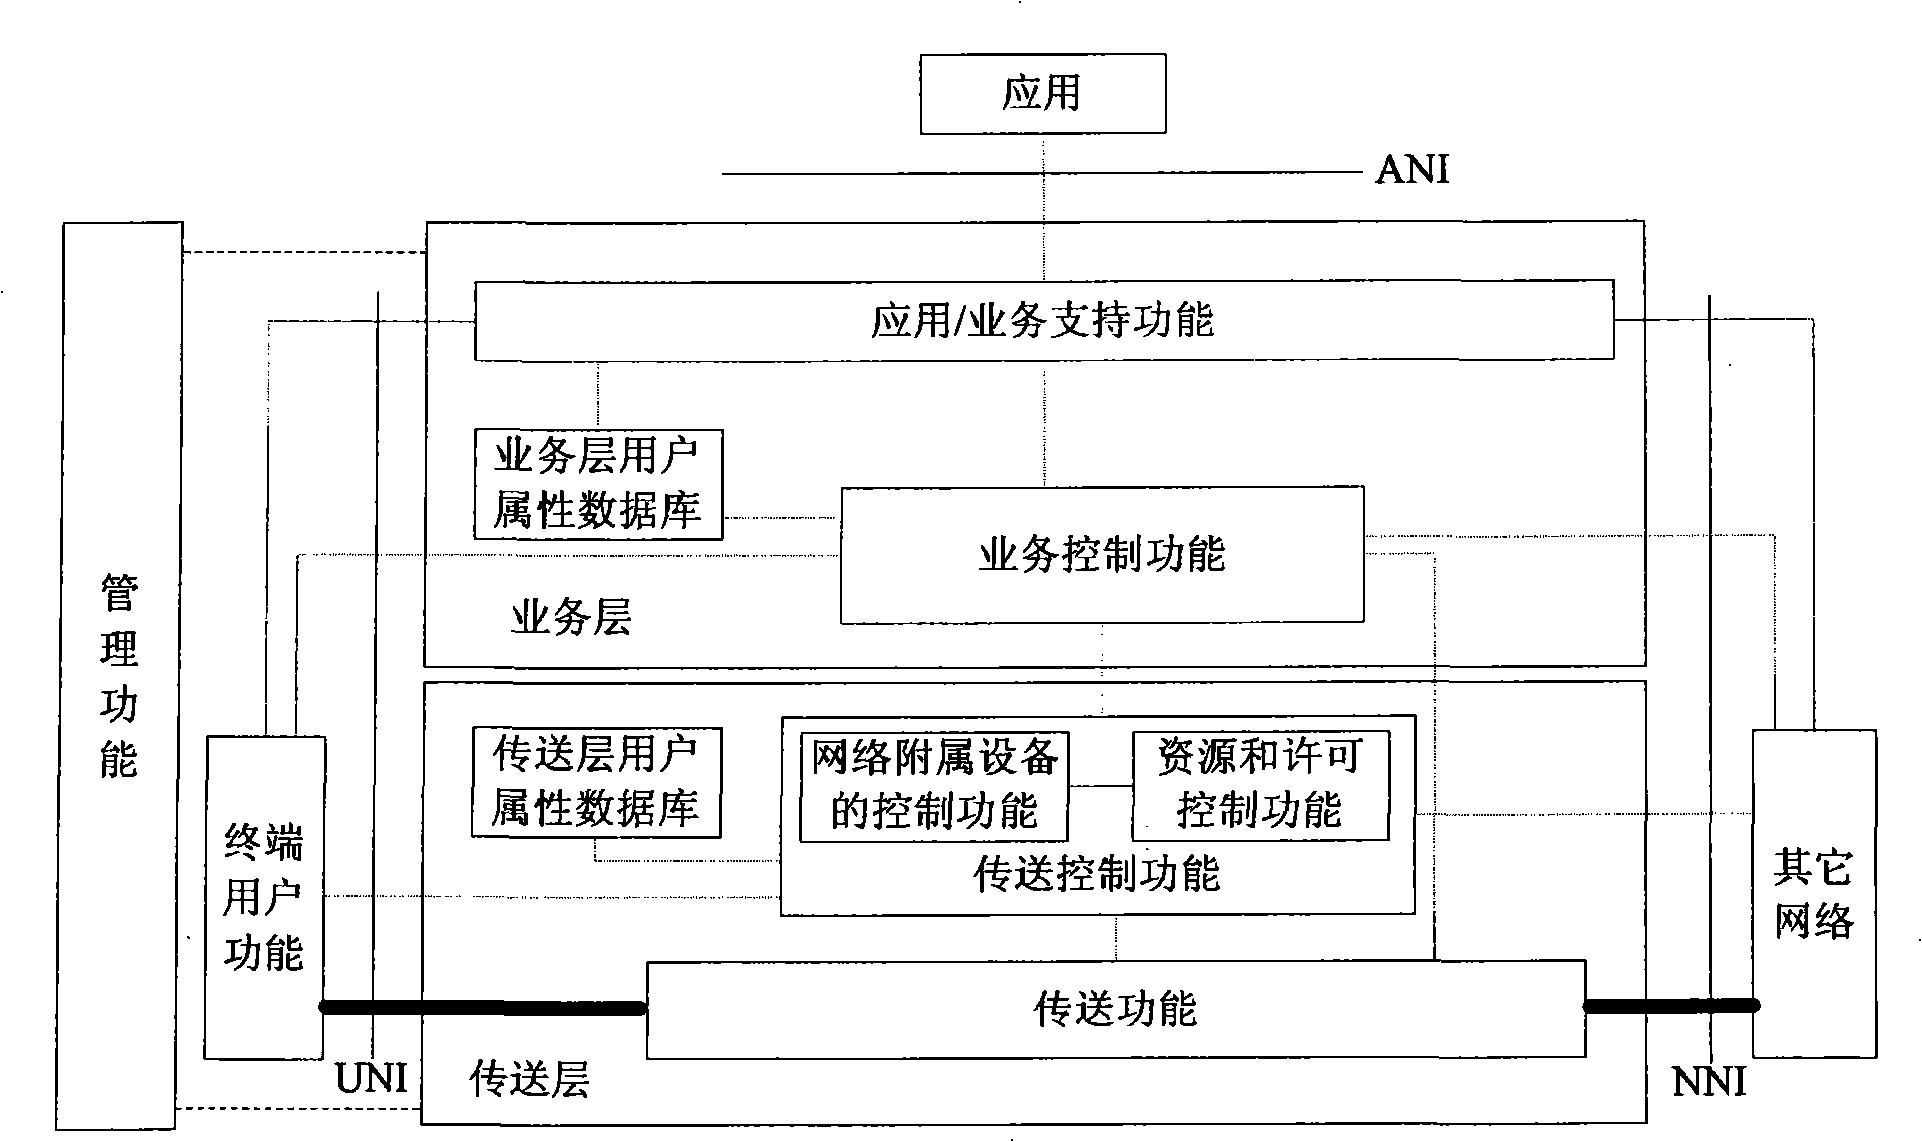 Method for selecting charging system in next-generation network